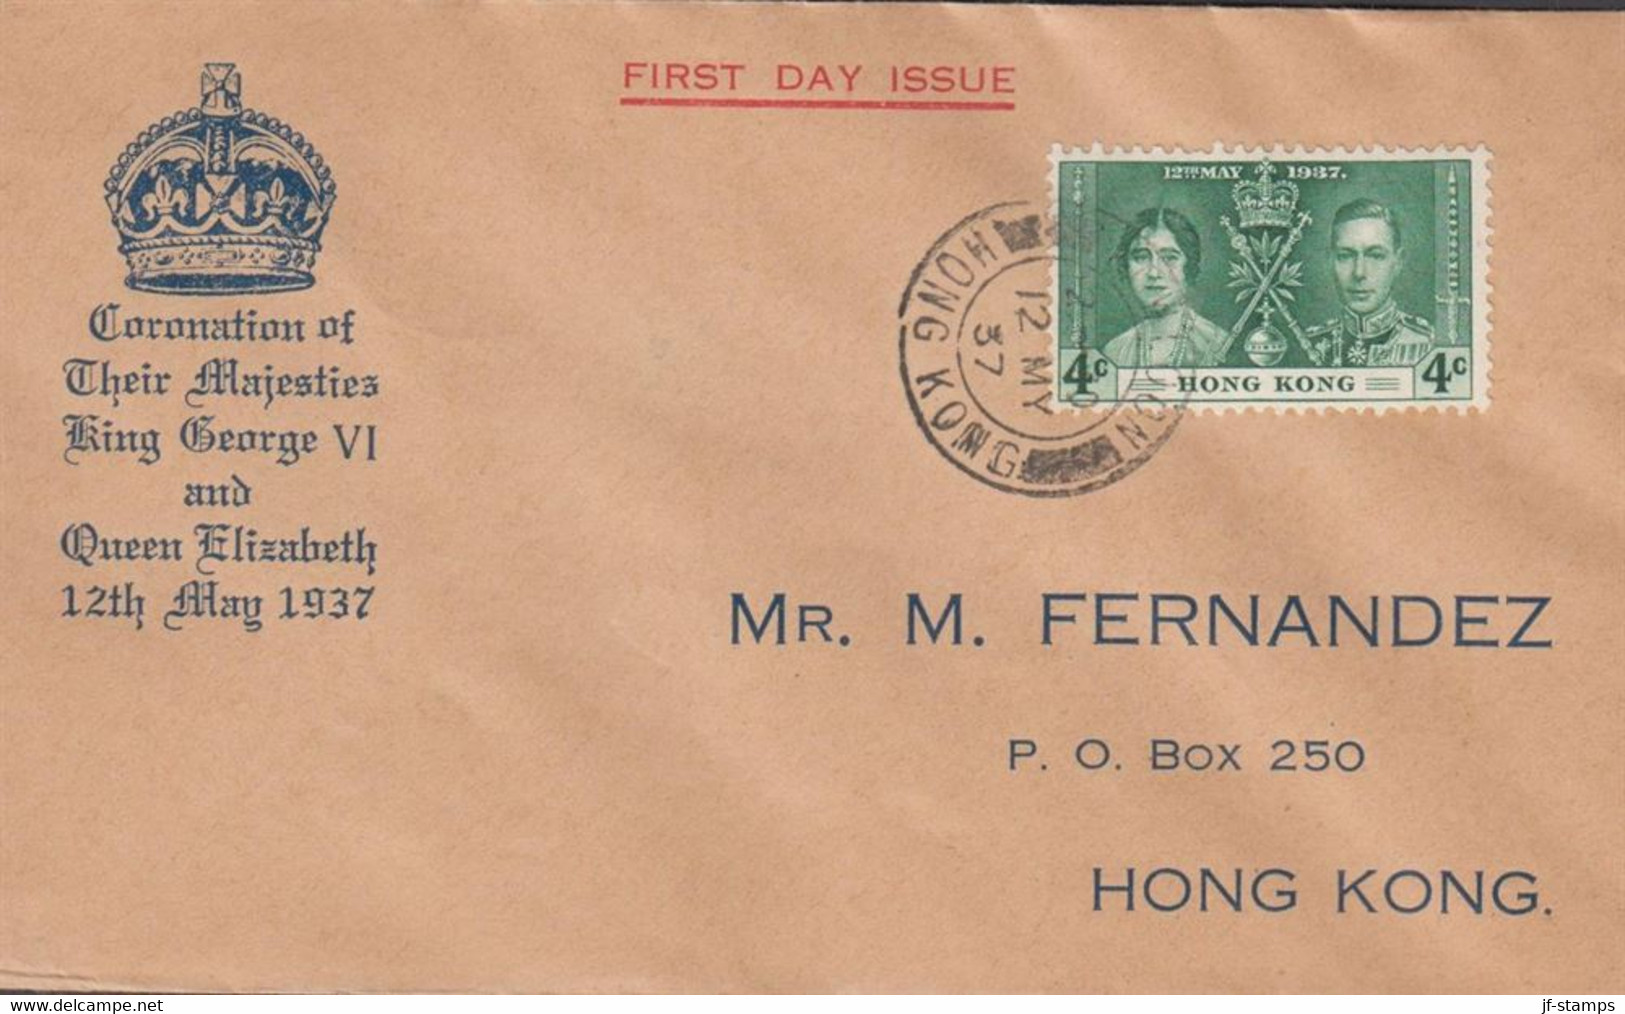 1937. HONG KONG Georg VI. 4 C Coronation On Nice FDC Cancelled FIRST DAY OF ISSUE KOWLOON HON... (Michel 136) - JF427050 - Storia Postale